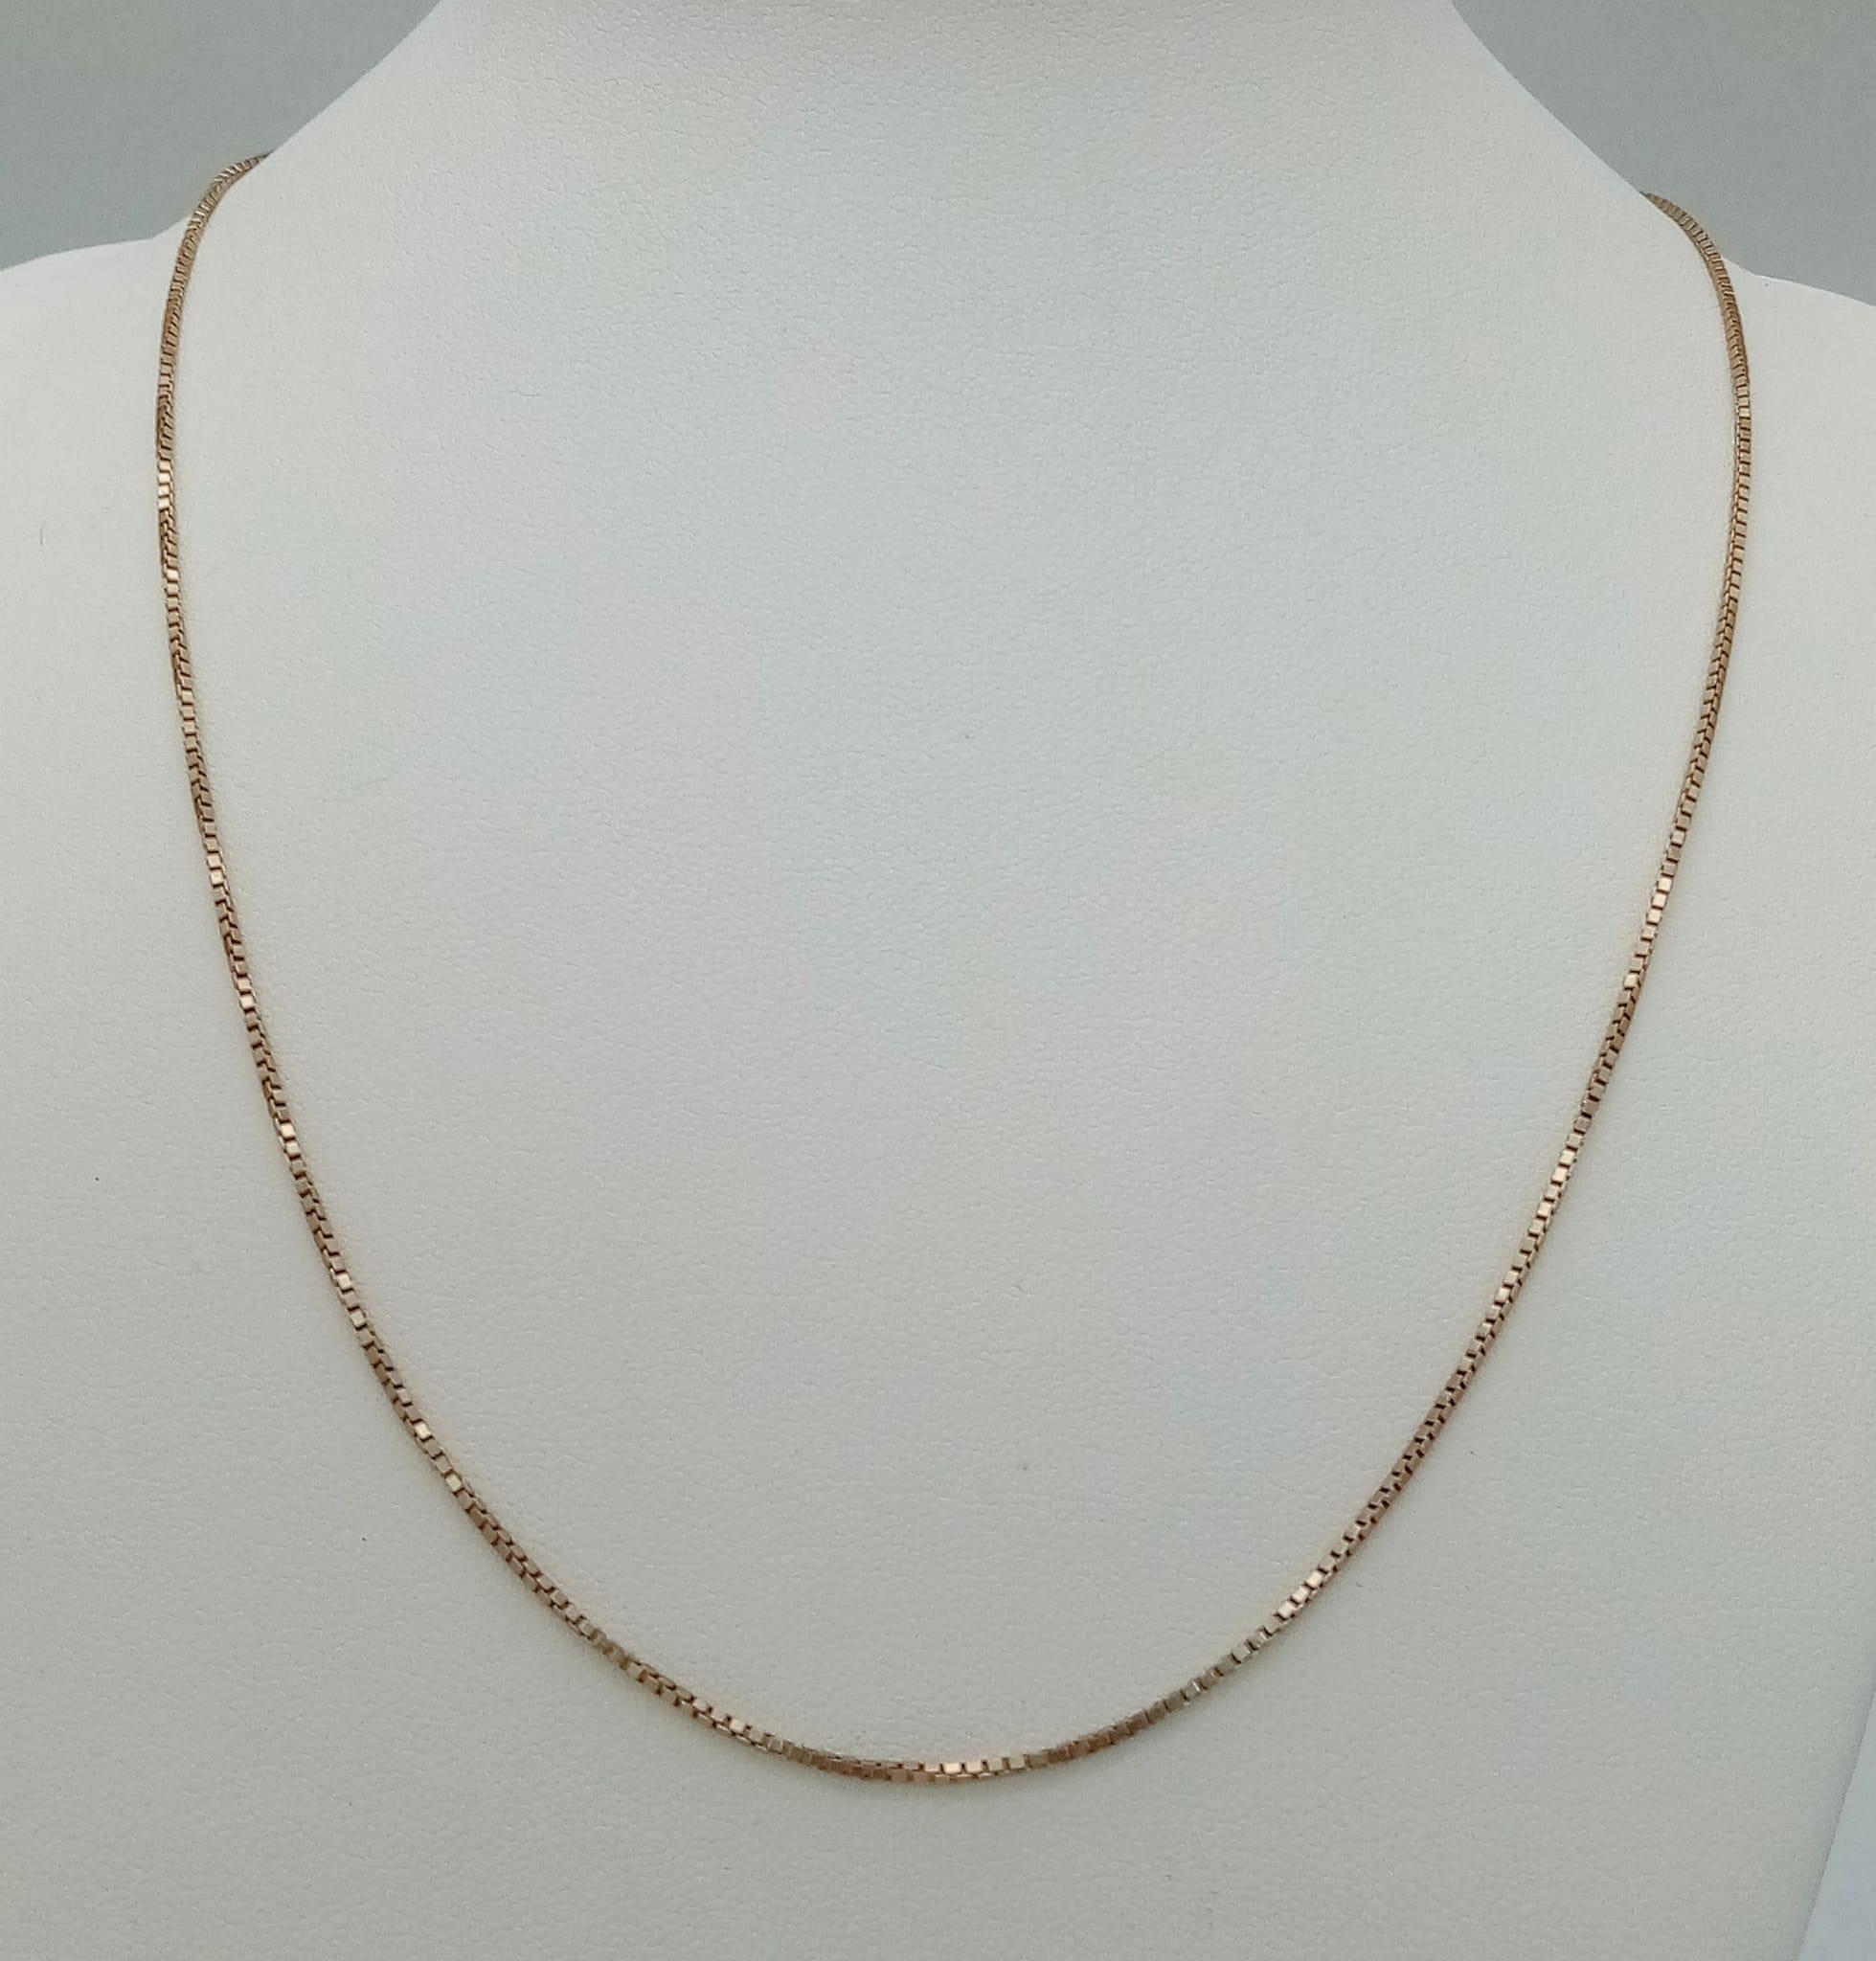 A FINE BOX LINK 9K GOLD CHAIN . 3.3gms 46cms - Image 4 of 4